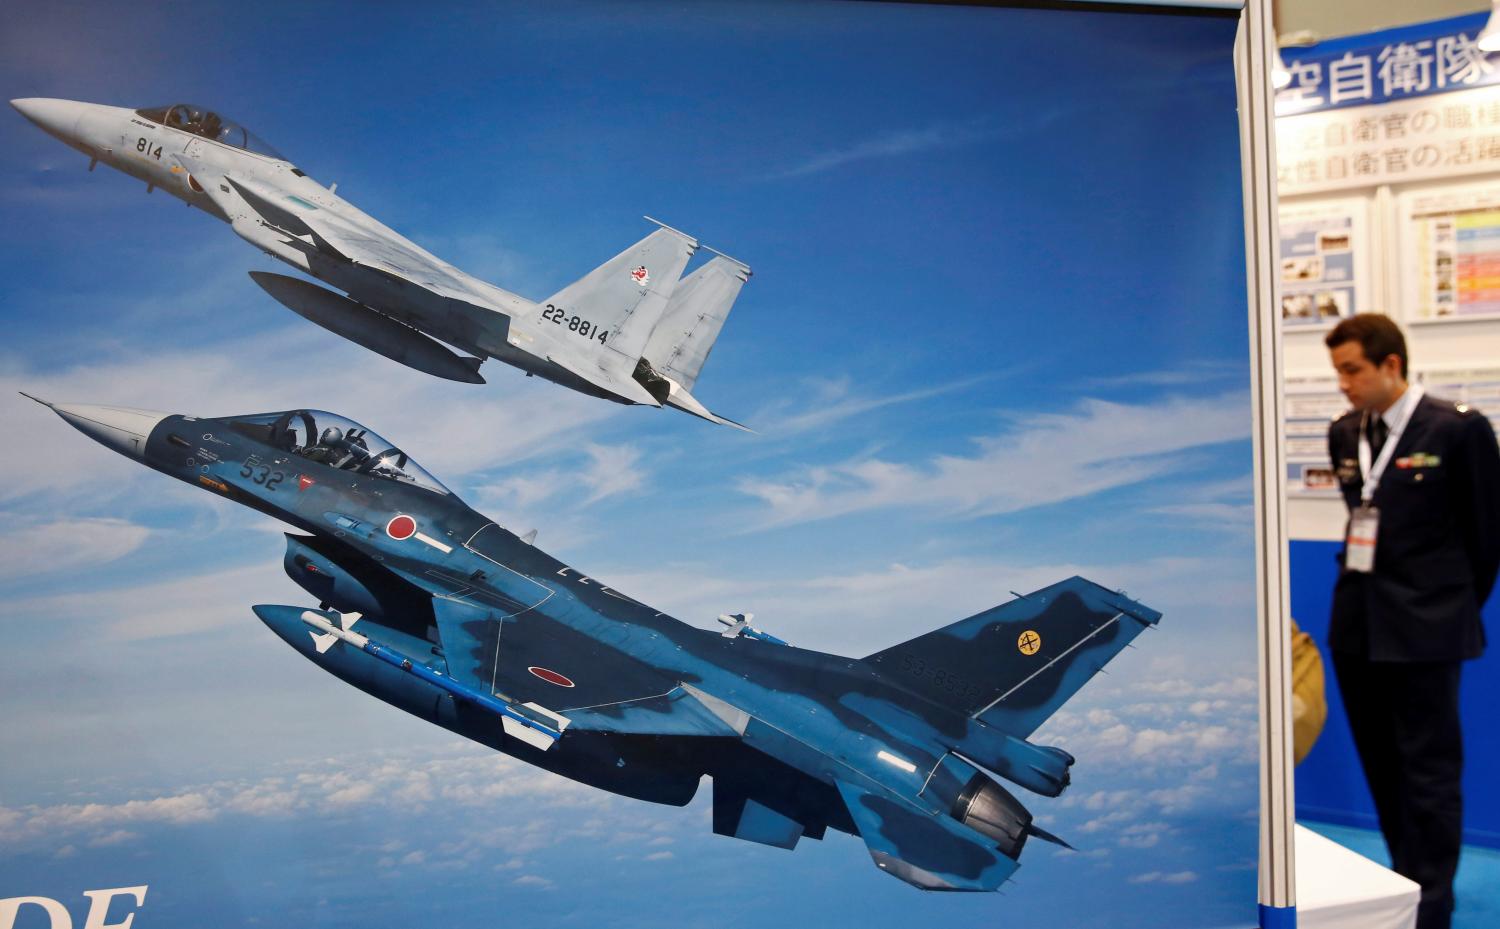 Picture of a poster of Japanese fighter planes.